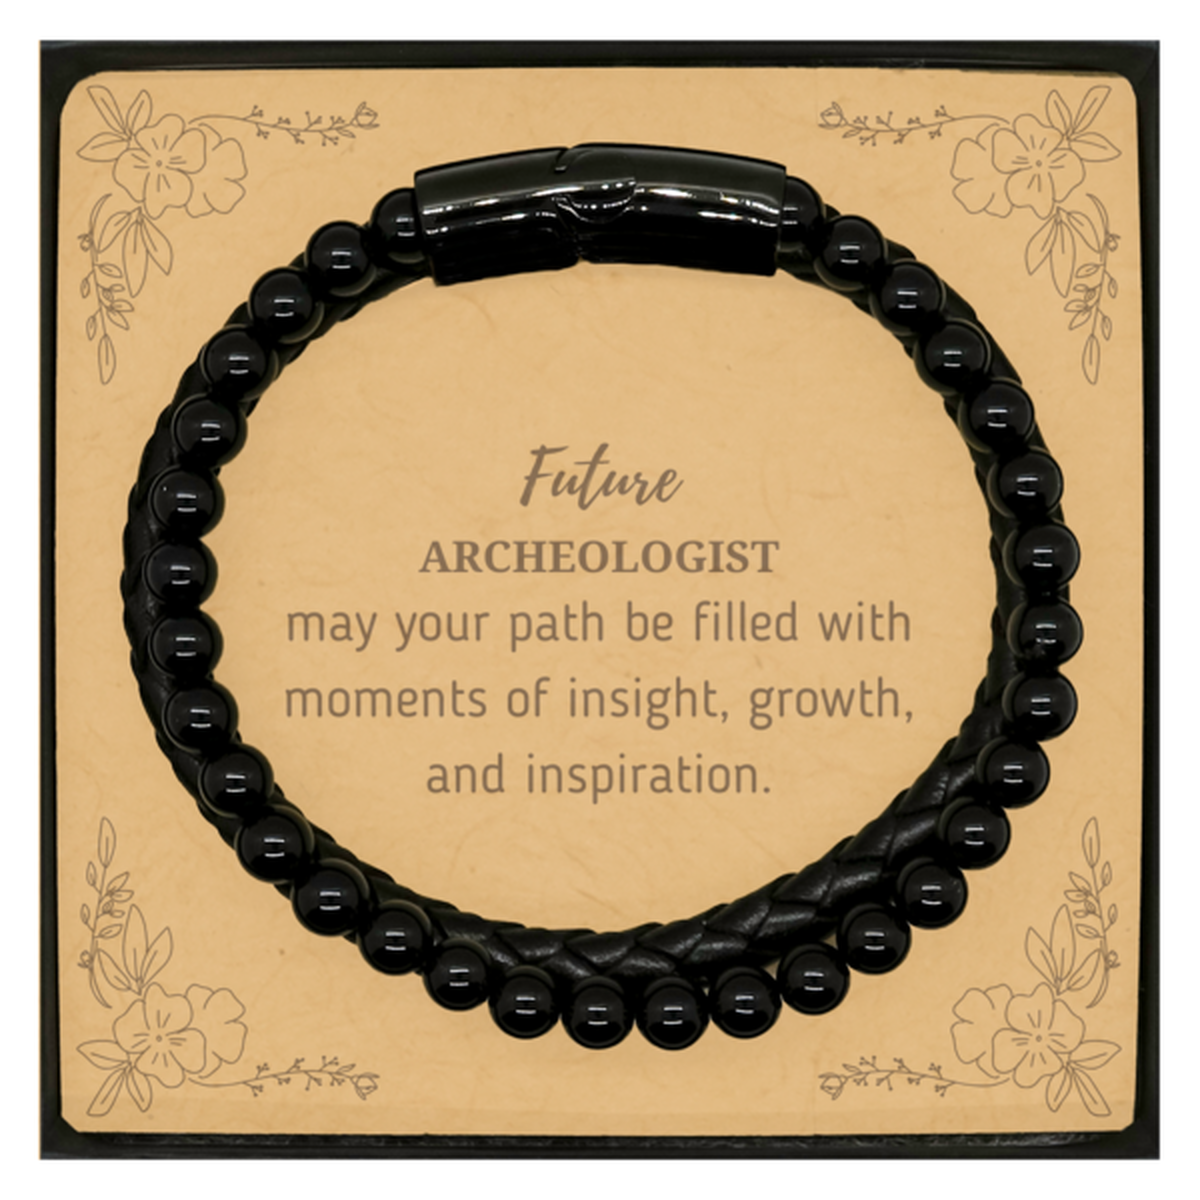 Future Archeologist Gifts, May your path be filled with moments of insight, Graduation Gifts for New Archeologist, Christmas Unique Stone Leather Bracelets For Men, Women, Friends